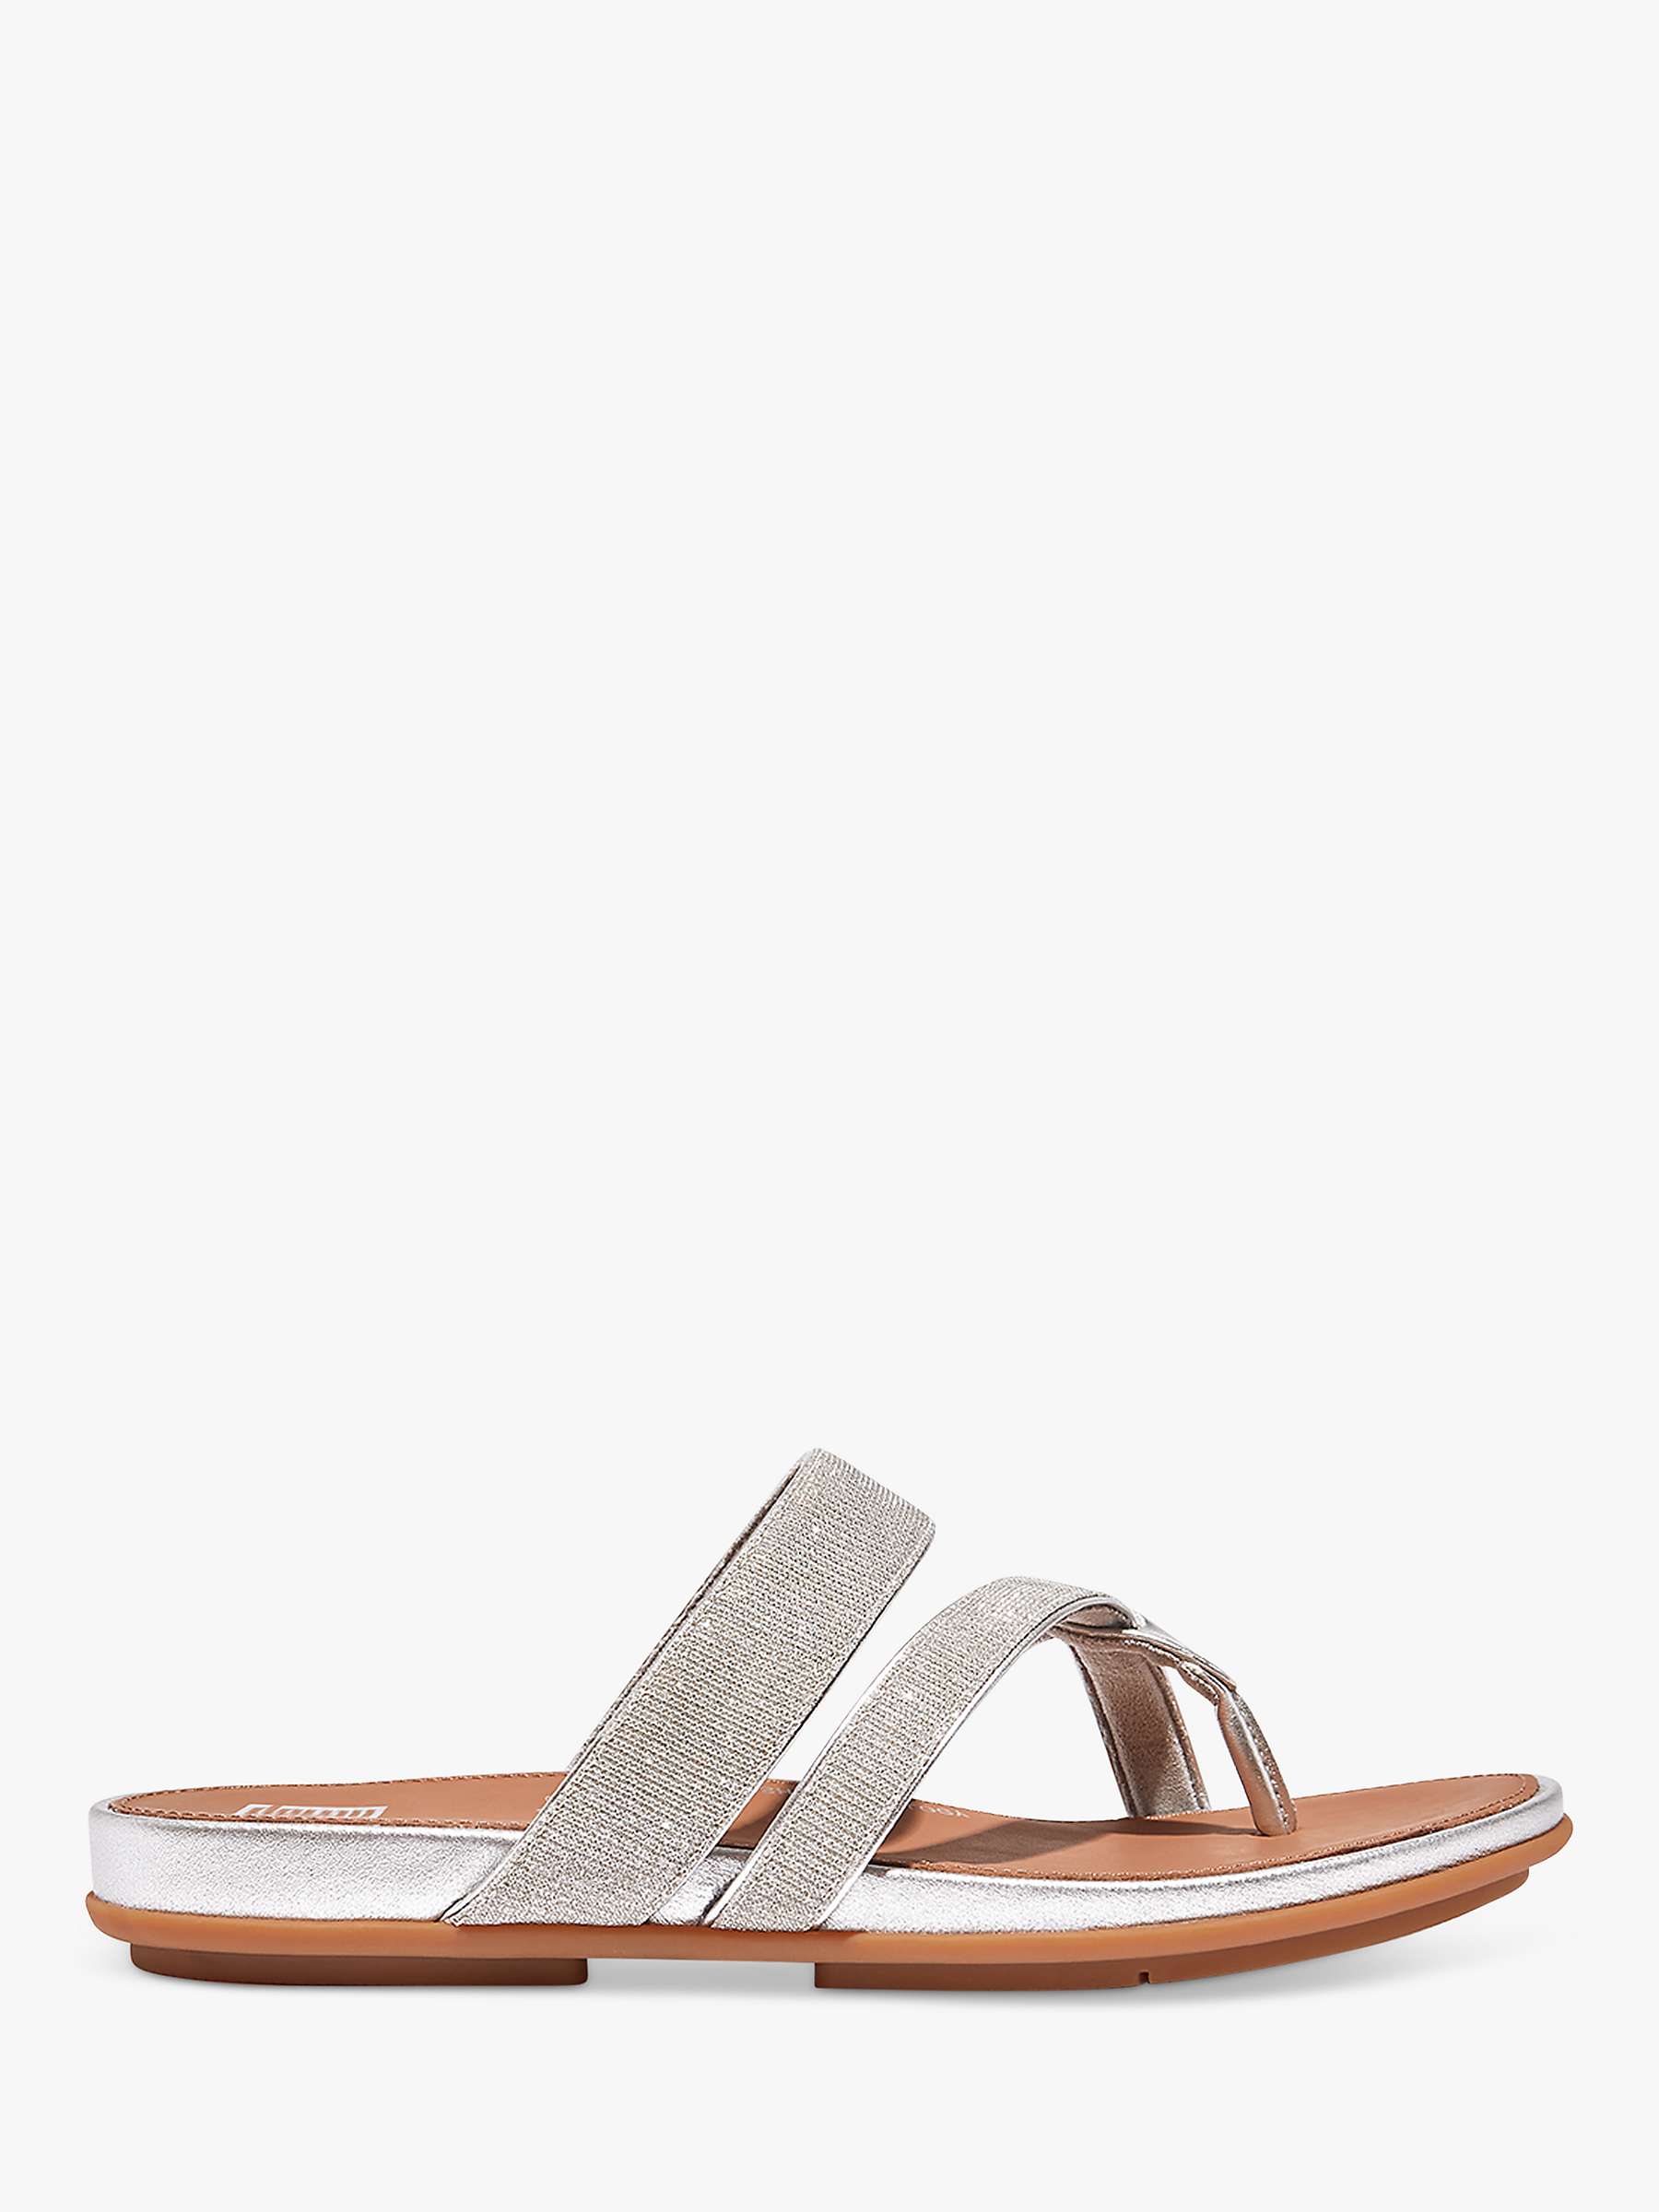 Buy FitFlop Gracie Strappy Toe Post Sandals, Silver Online at johnlewis.com